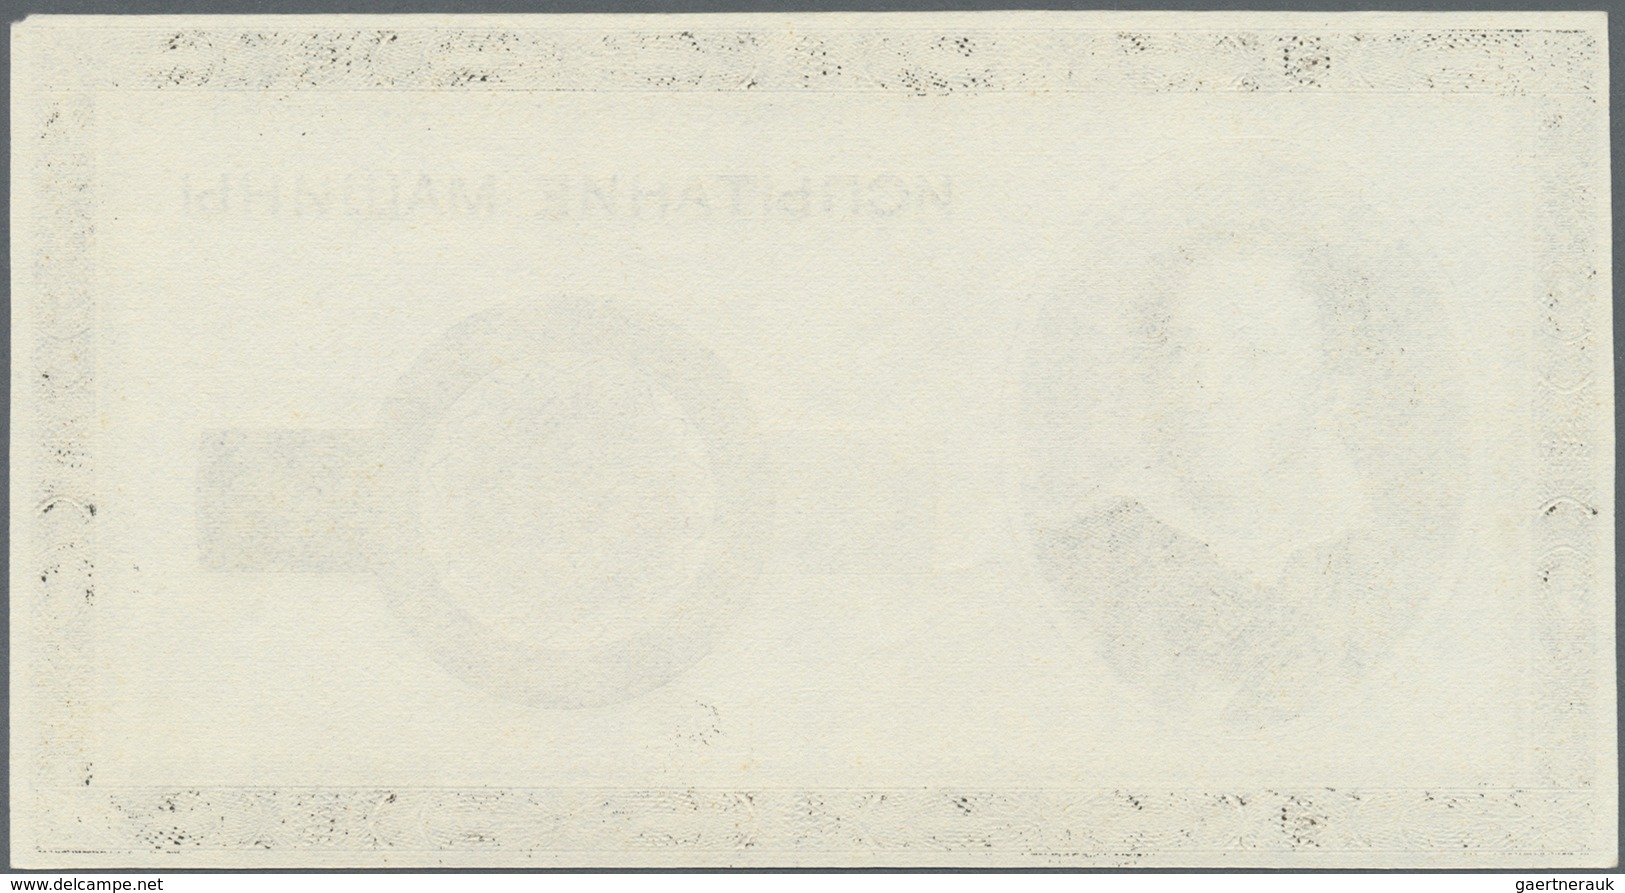 Testbanknoten: Intaglio Printed Test Note Uniface On Banknote Paper, Printed By ABNC On A Giori Pres - Specimen